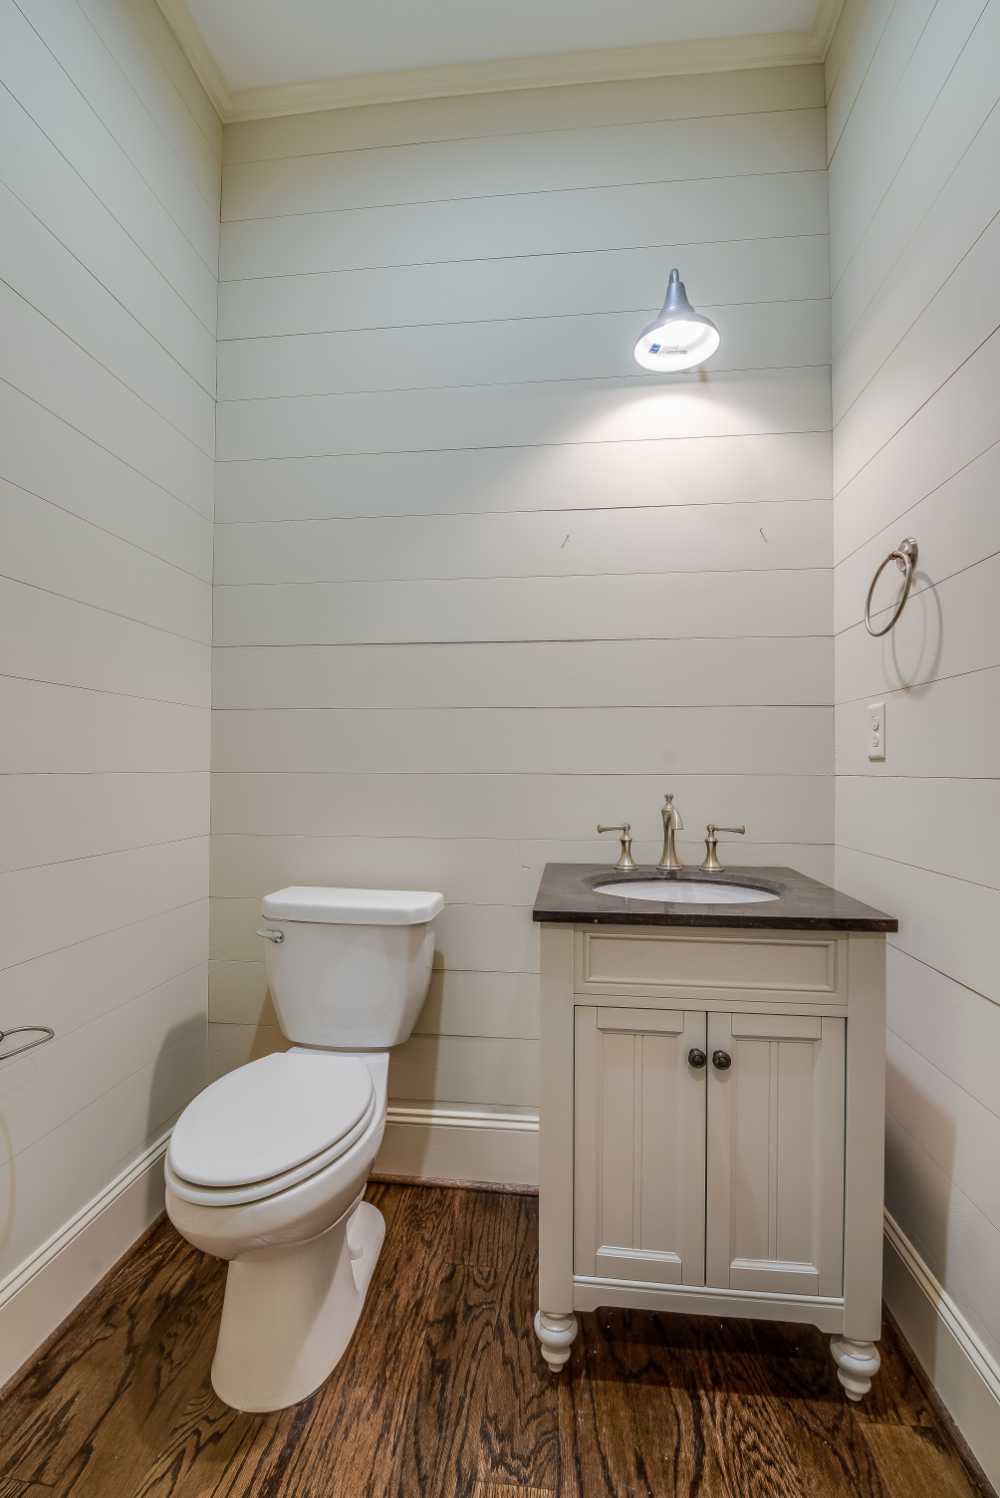 A small half bathroom with quick private access converted from a small closet